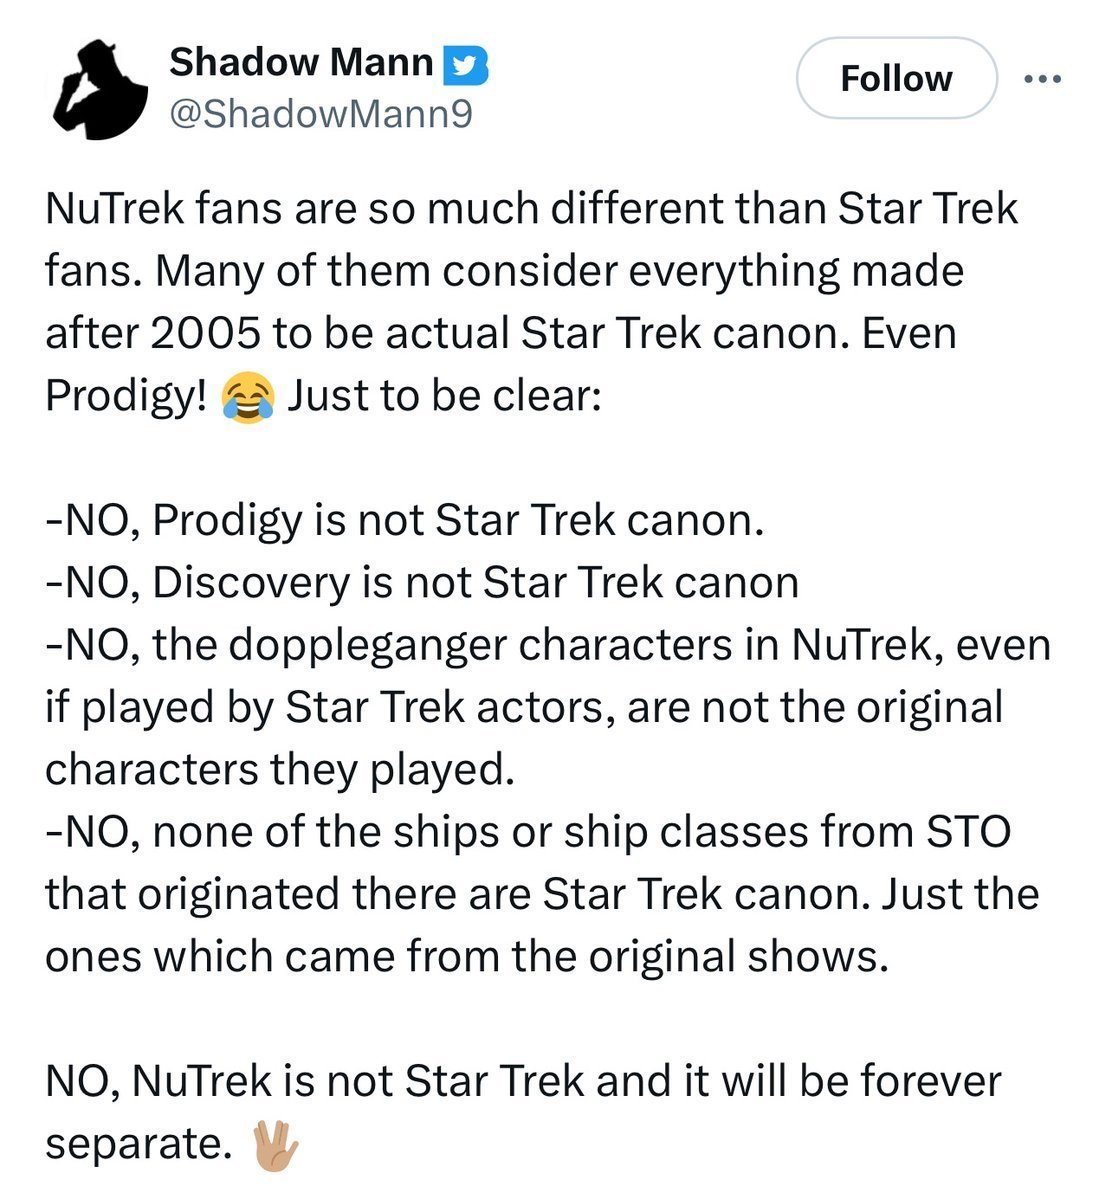 Whenever someone uses the term NuTrek, I know immediately who they are.

Pathetic little gatekeepy losers who have never actually watched the show they so proudly think they're defending.

An embarrassment to himself.